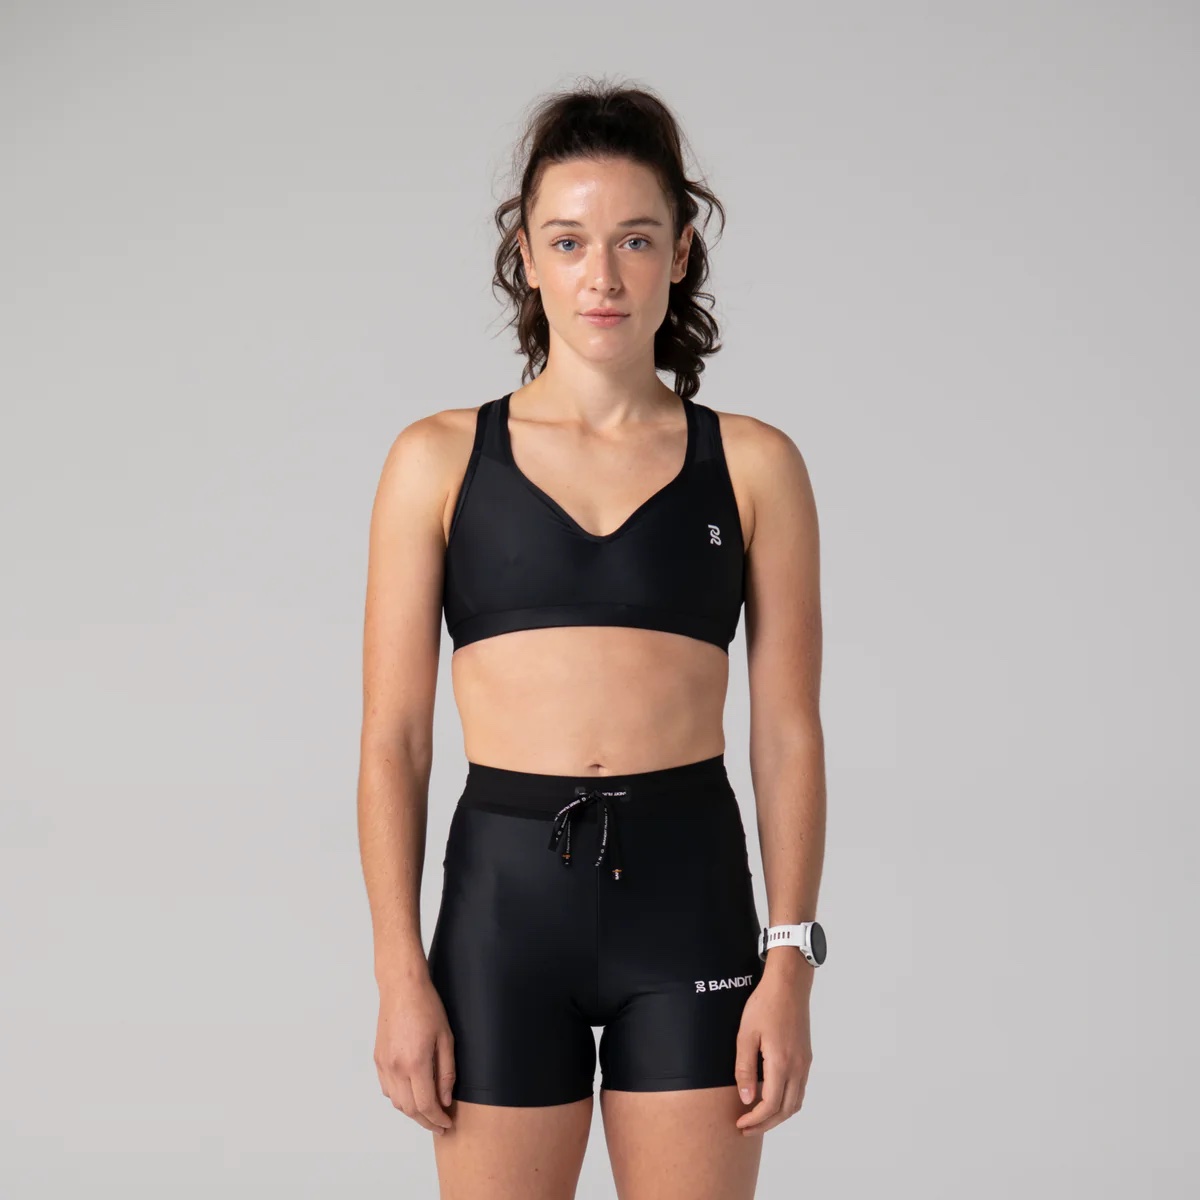 Sports Bras For Petites, small chested women, small boobs – Gymwearmovement